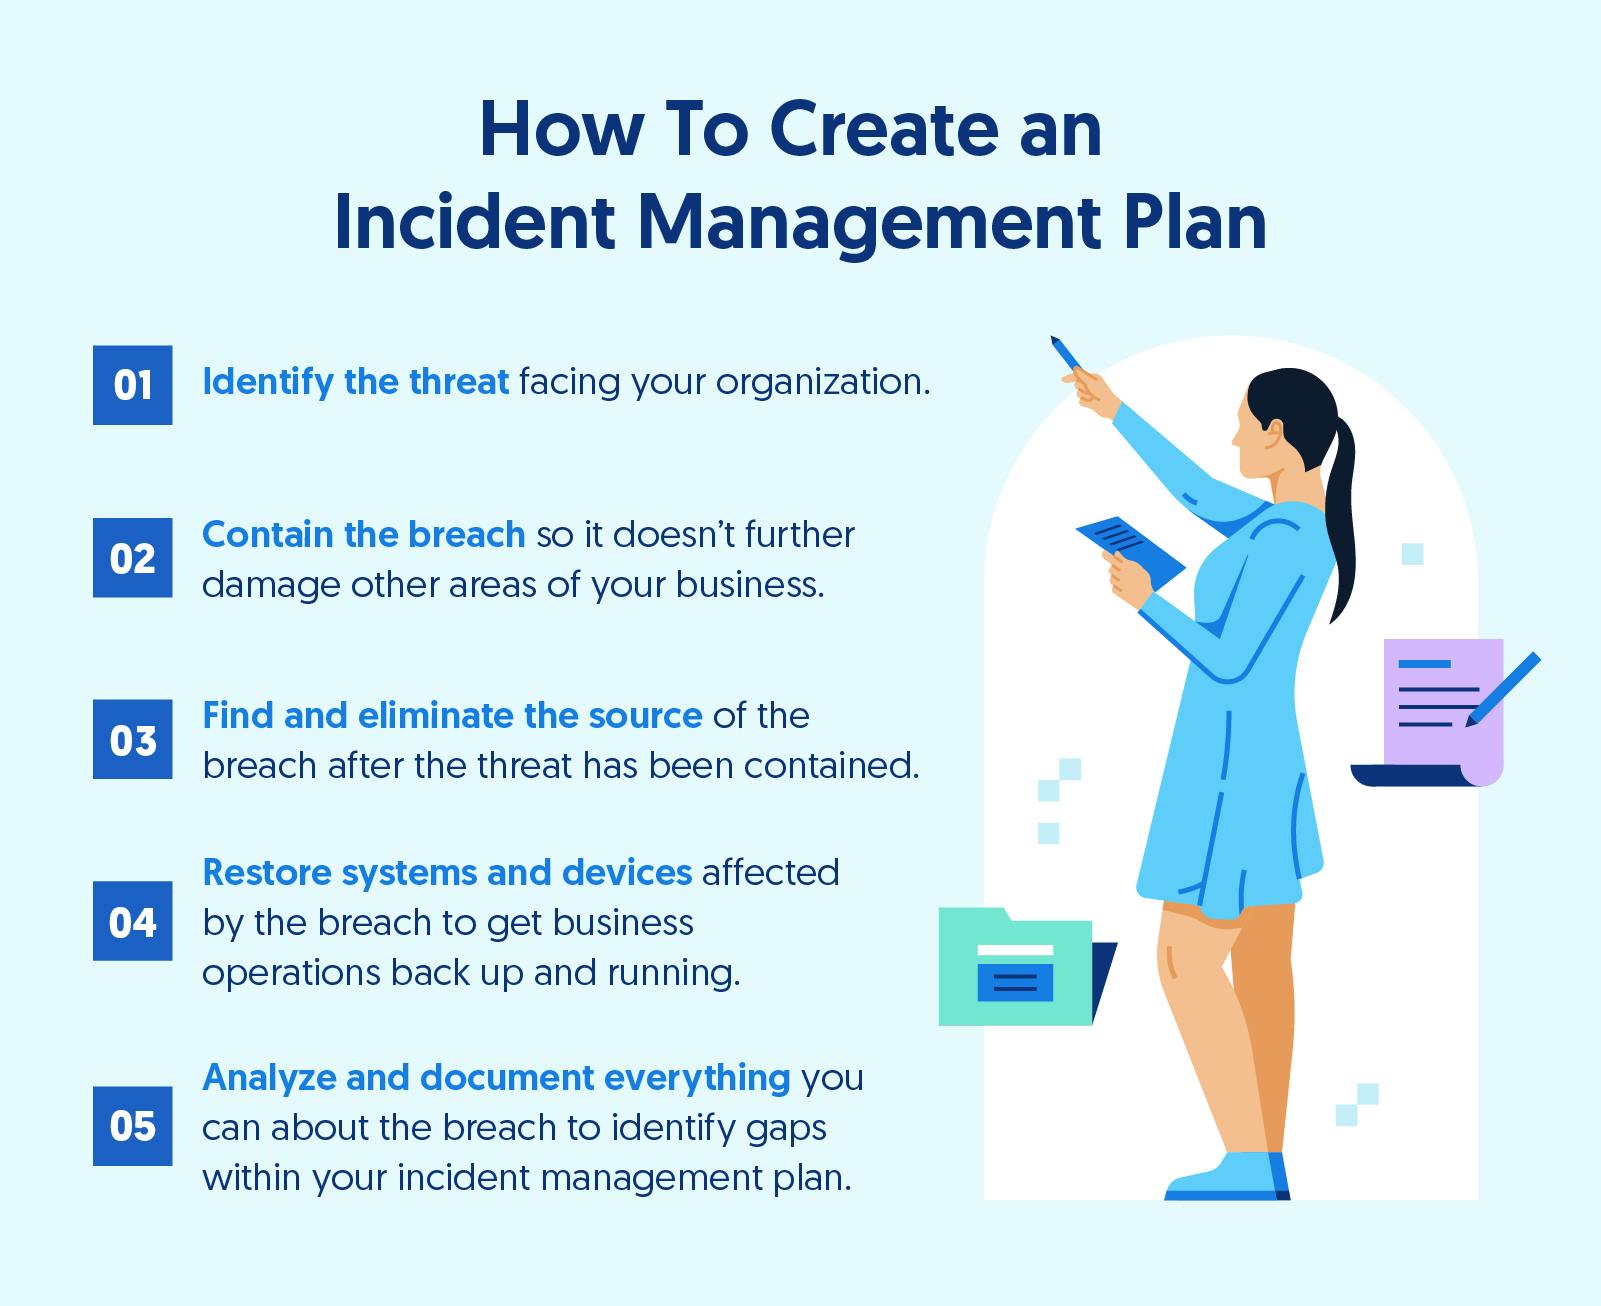 Illustration of a woman in blue dress and blue shoes reading a tablet and taking notes on how to create an incident management plan.